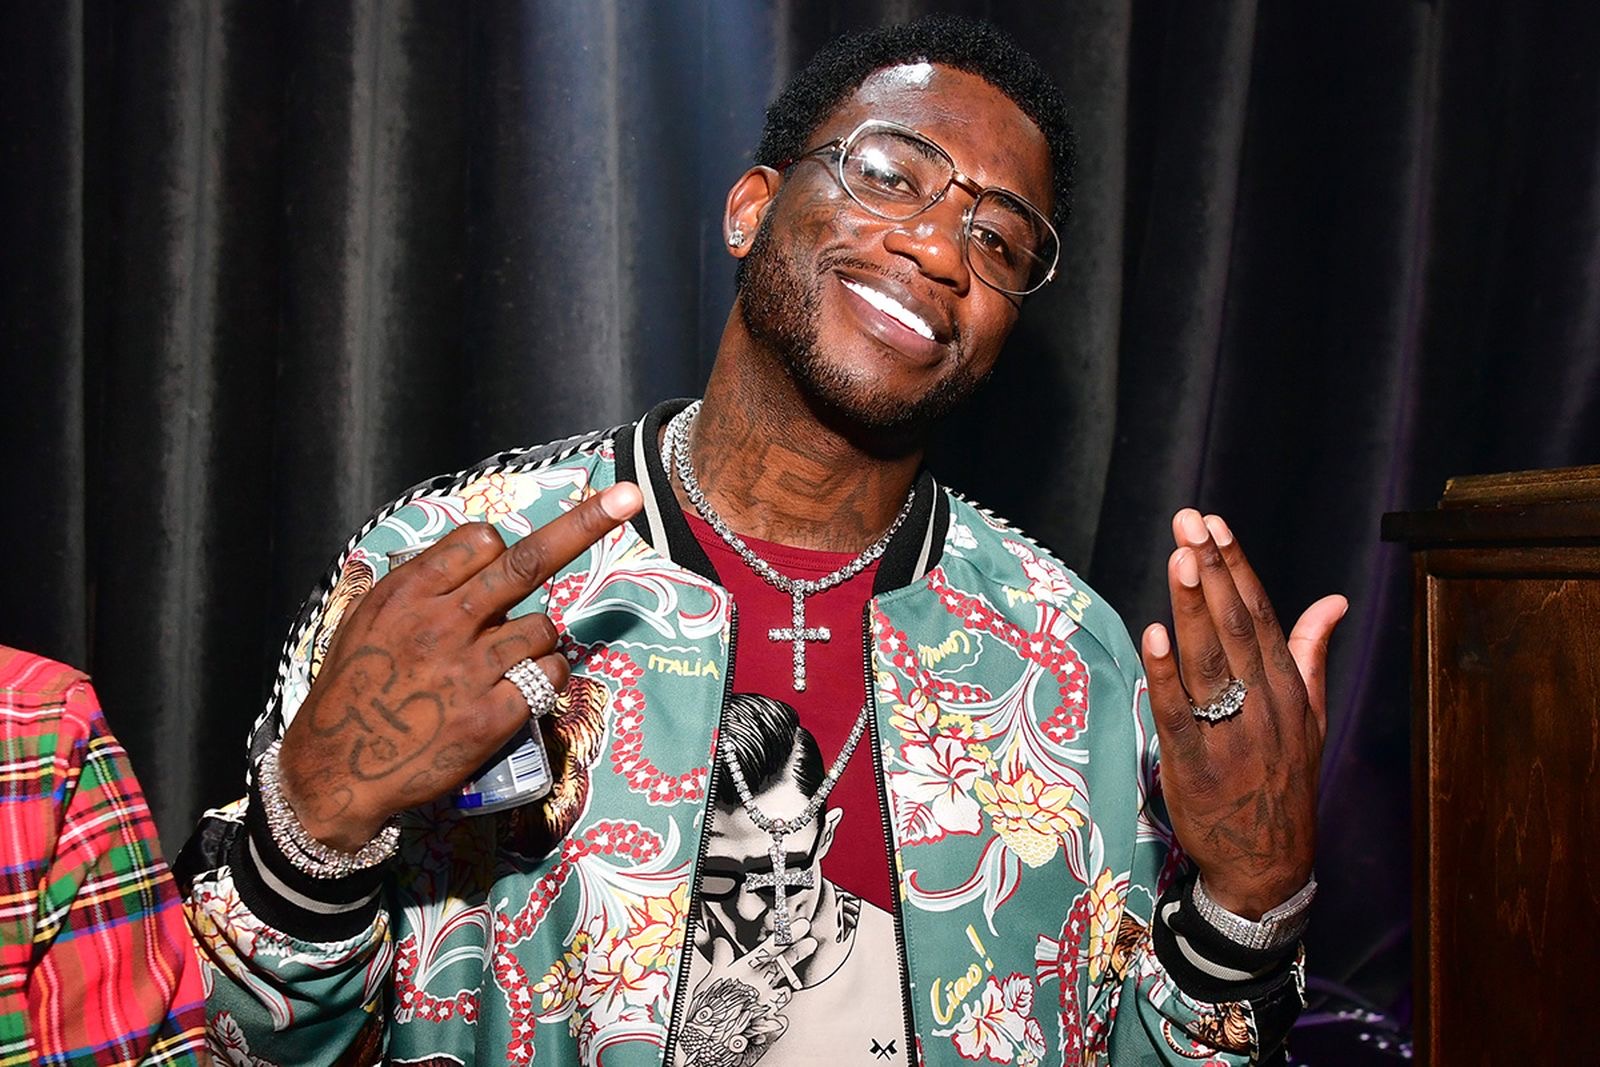 Car Collection of Gucci Mane | Gucci Mane Cars and Net Worth - AutoBizz